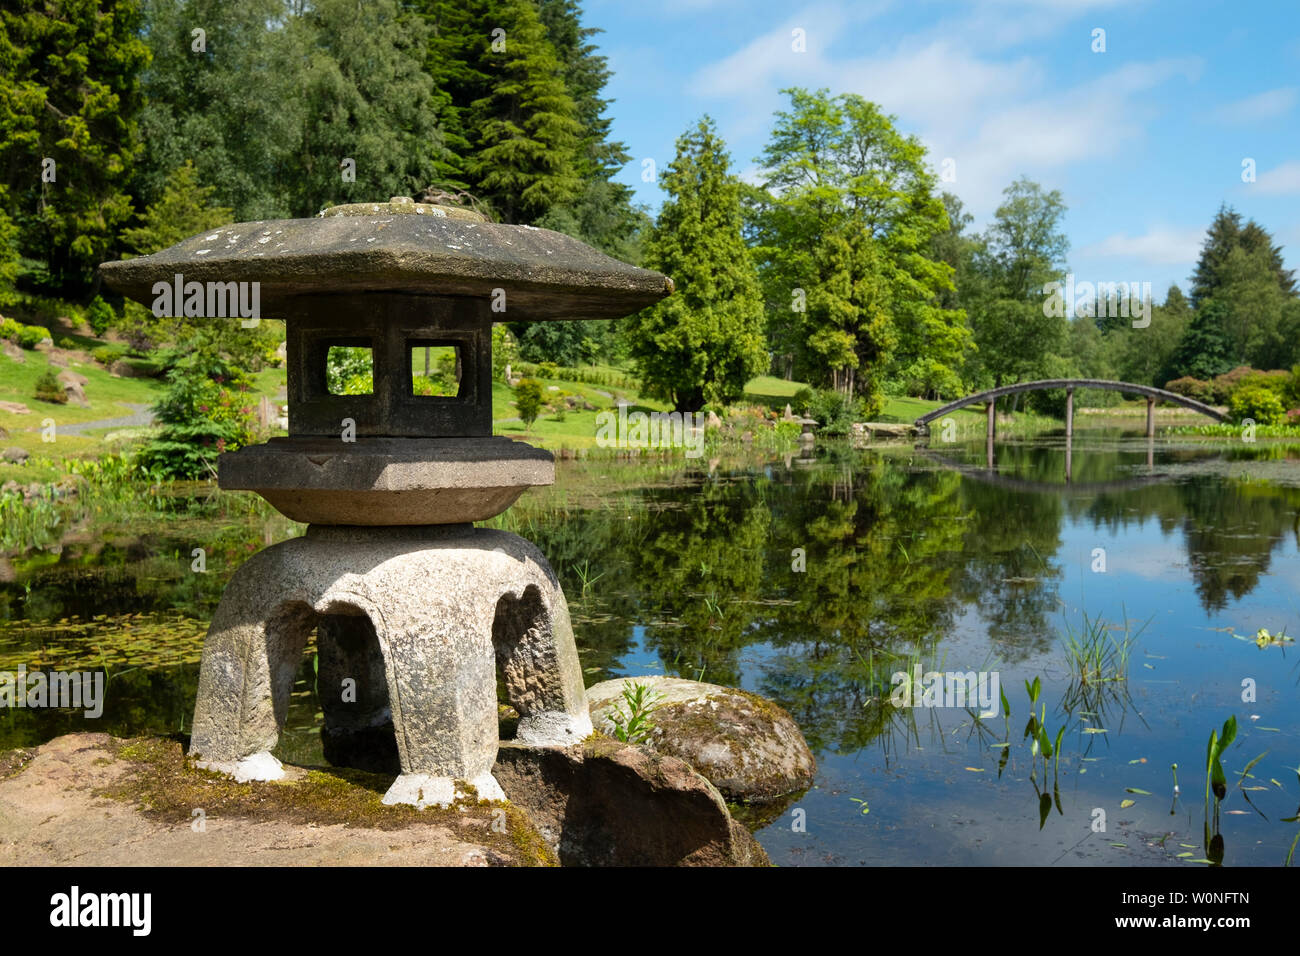 View of the new Japanese Garden at Cowden in Dollar, Clackmannanshire, Scotland, UK Stock Photo